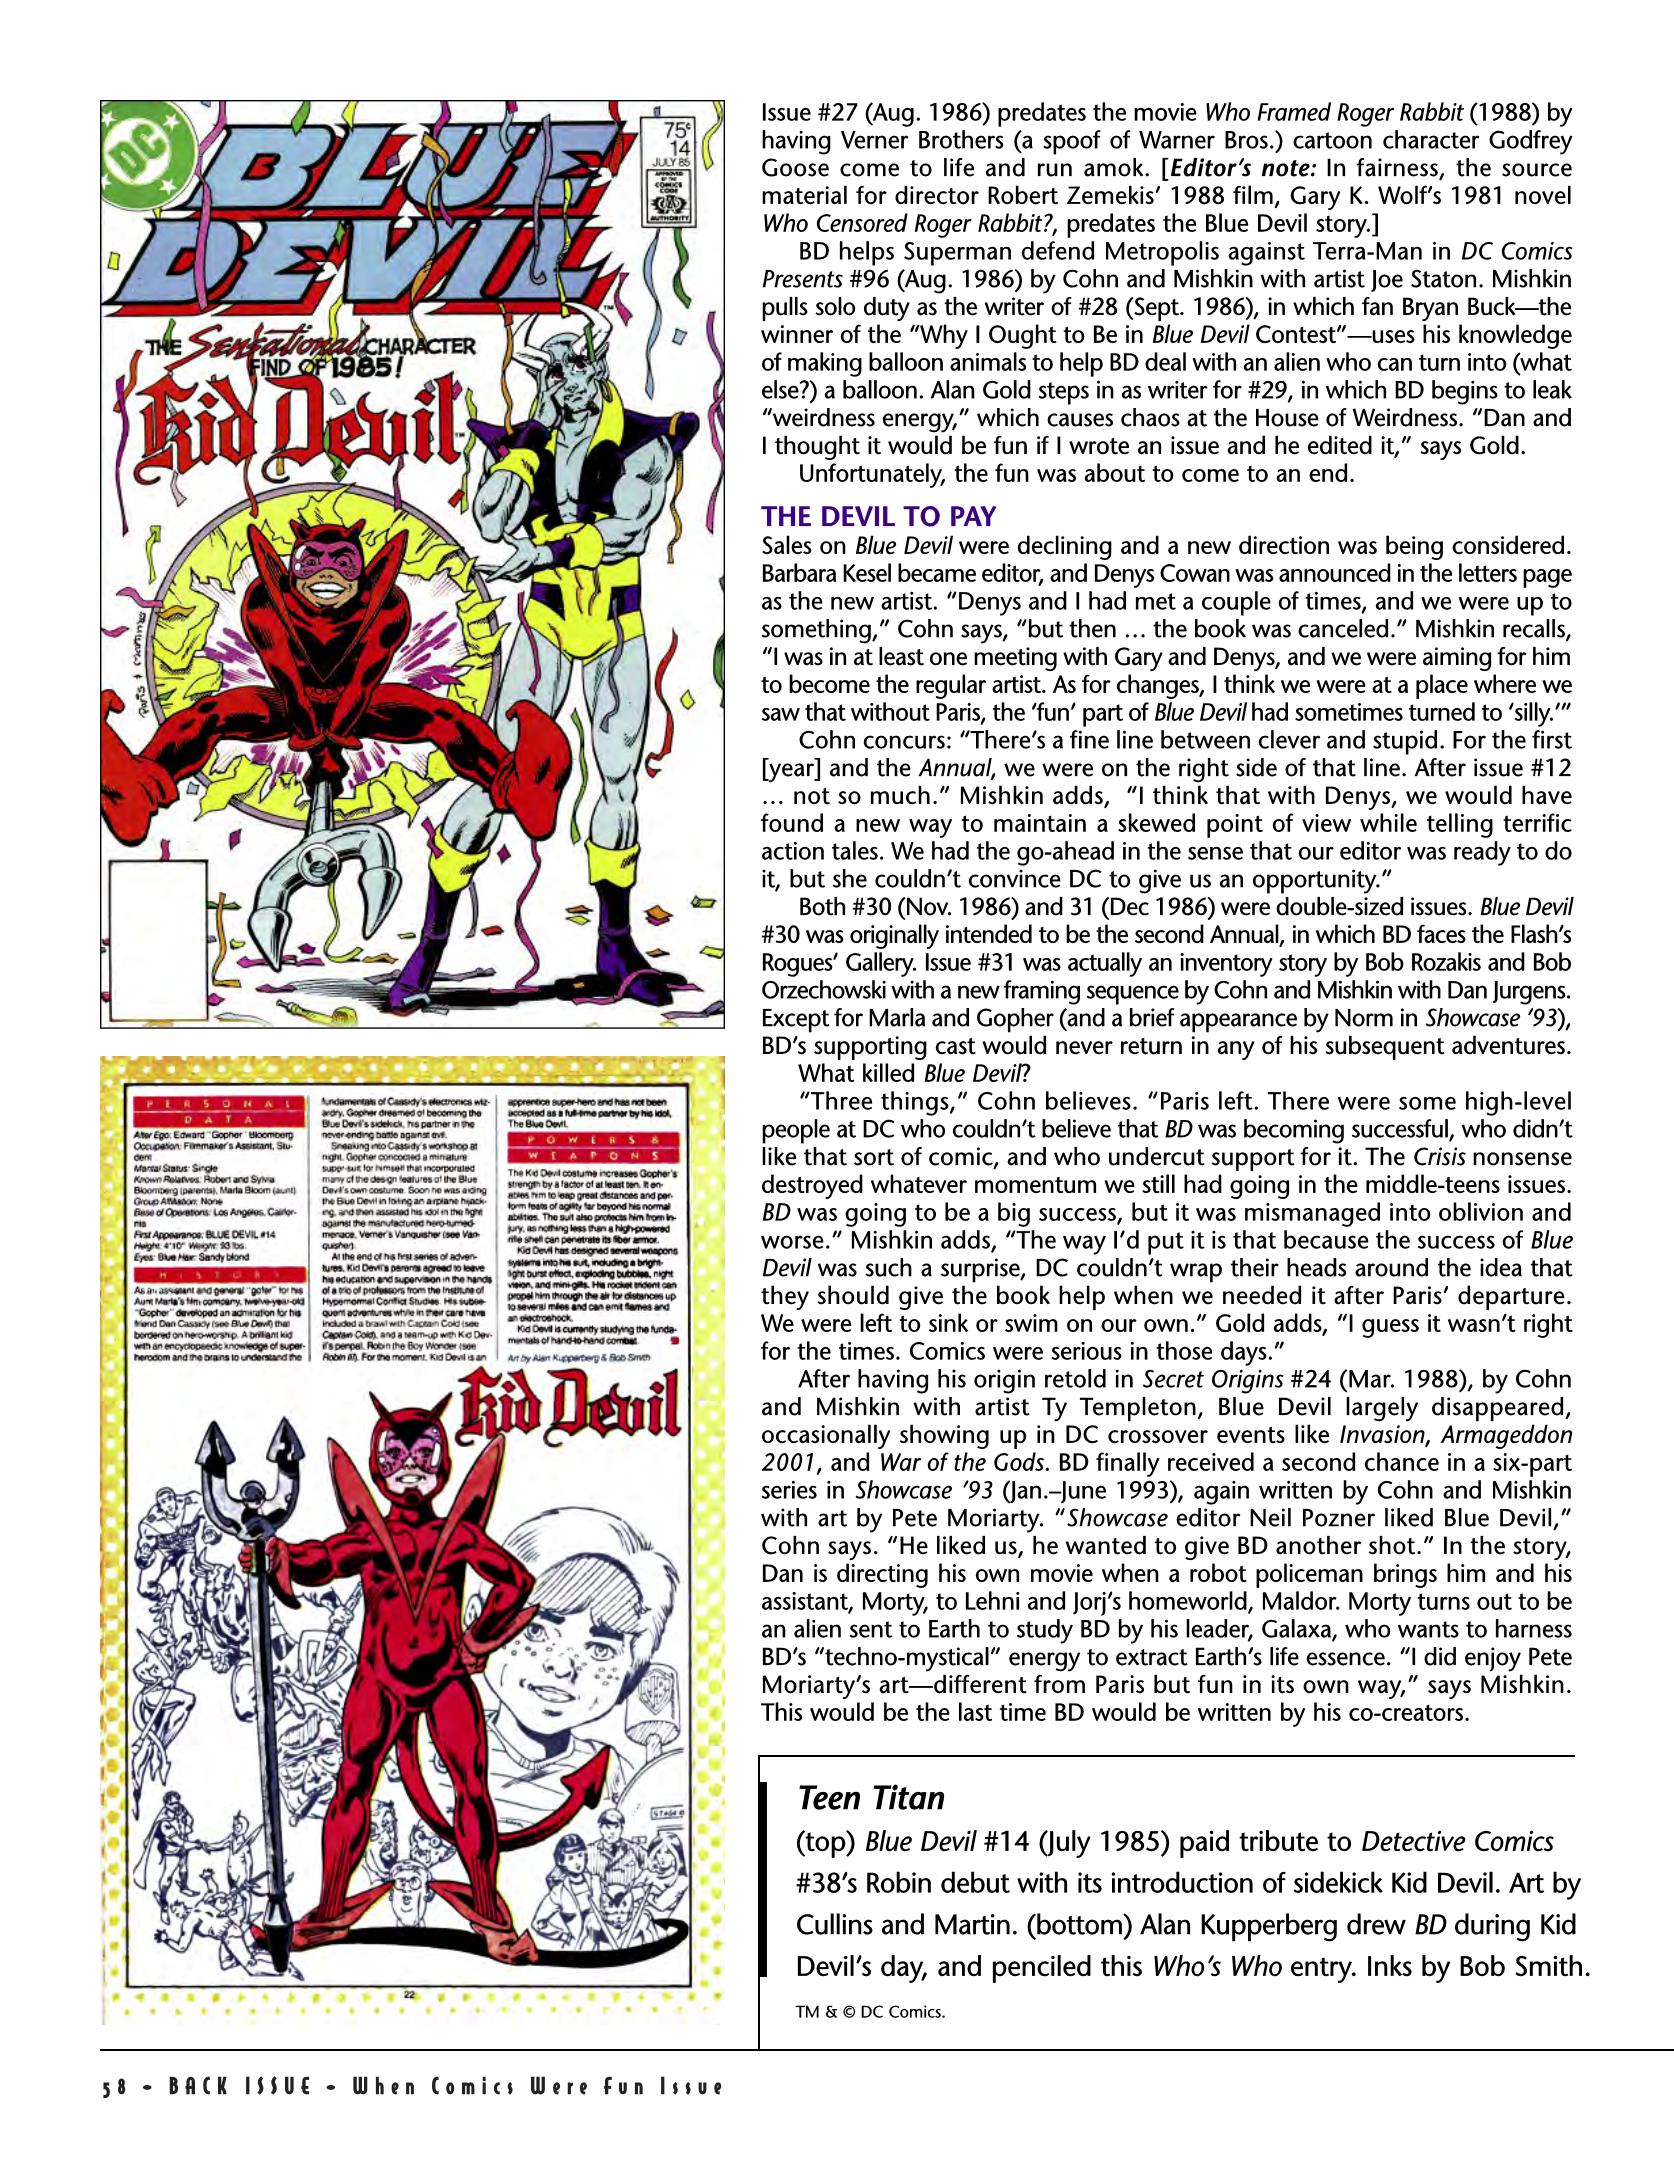 Read online Back Issue comic -  Issue #77 - 57